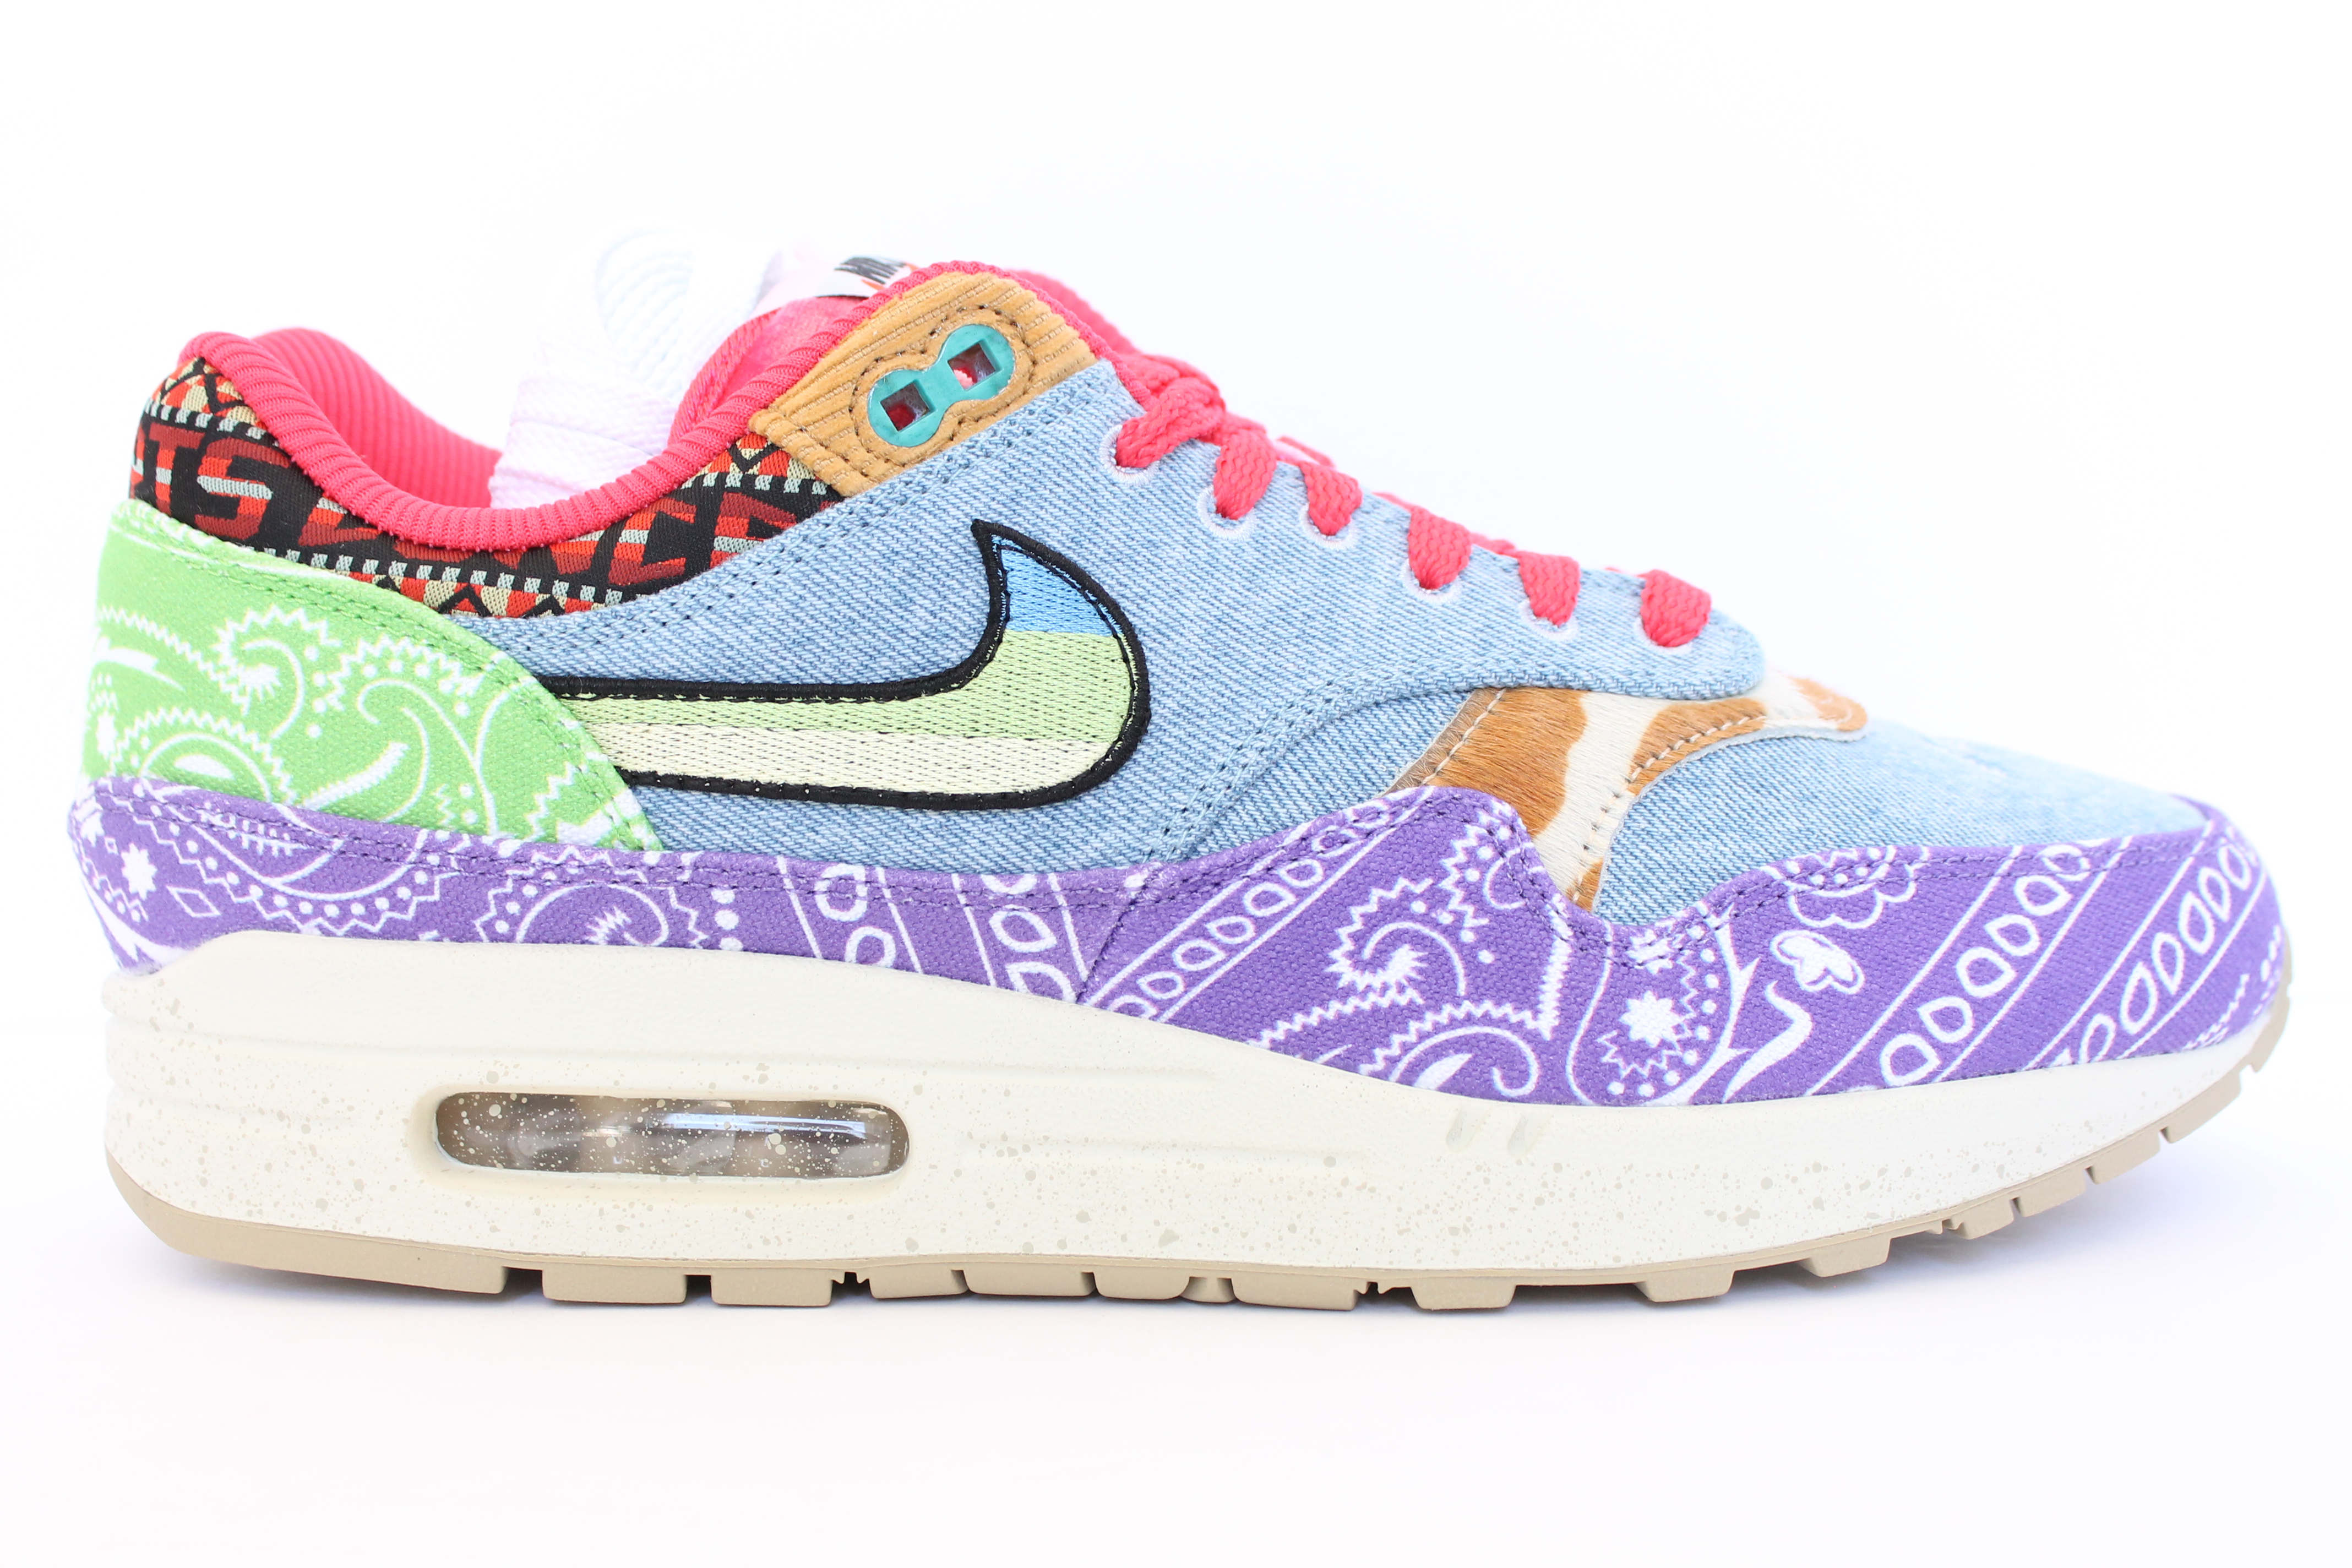 Nike Air Max 1 SP Concepts Far Out Special Box